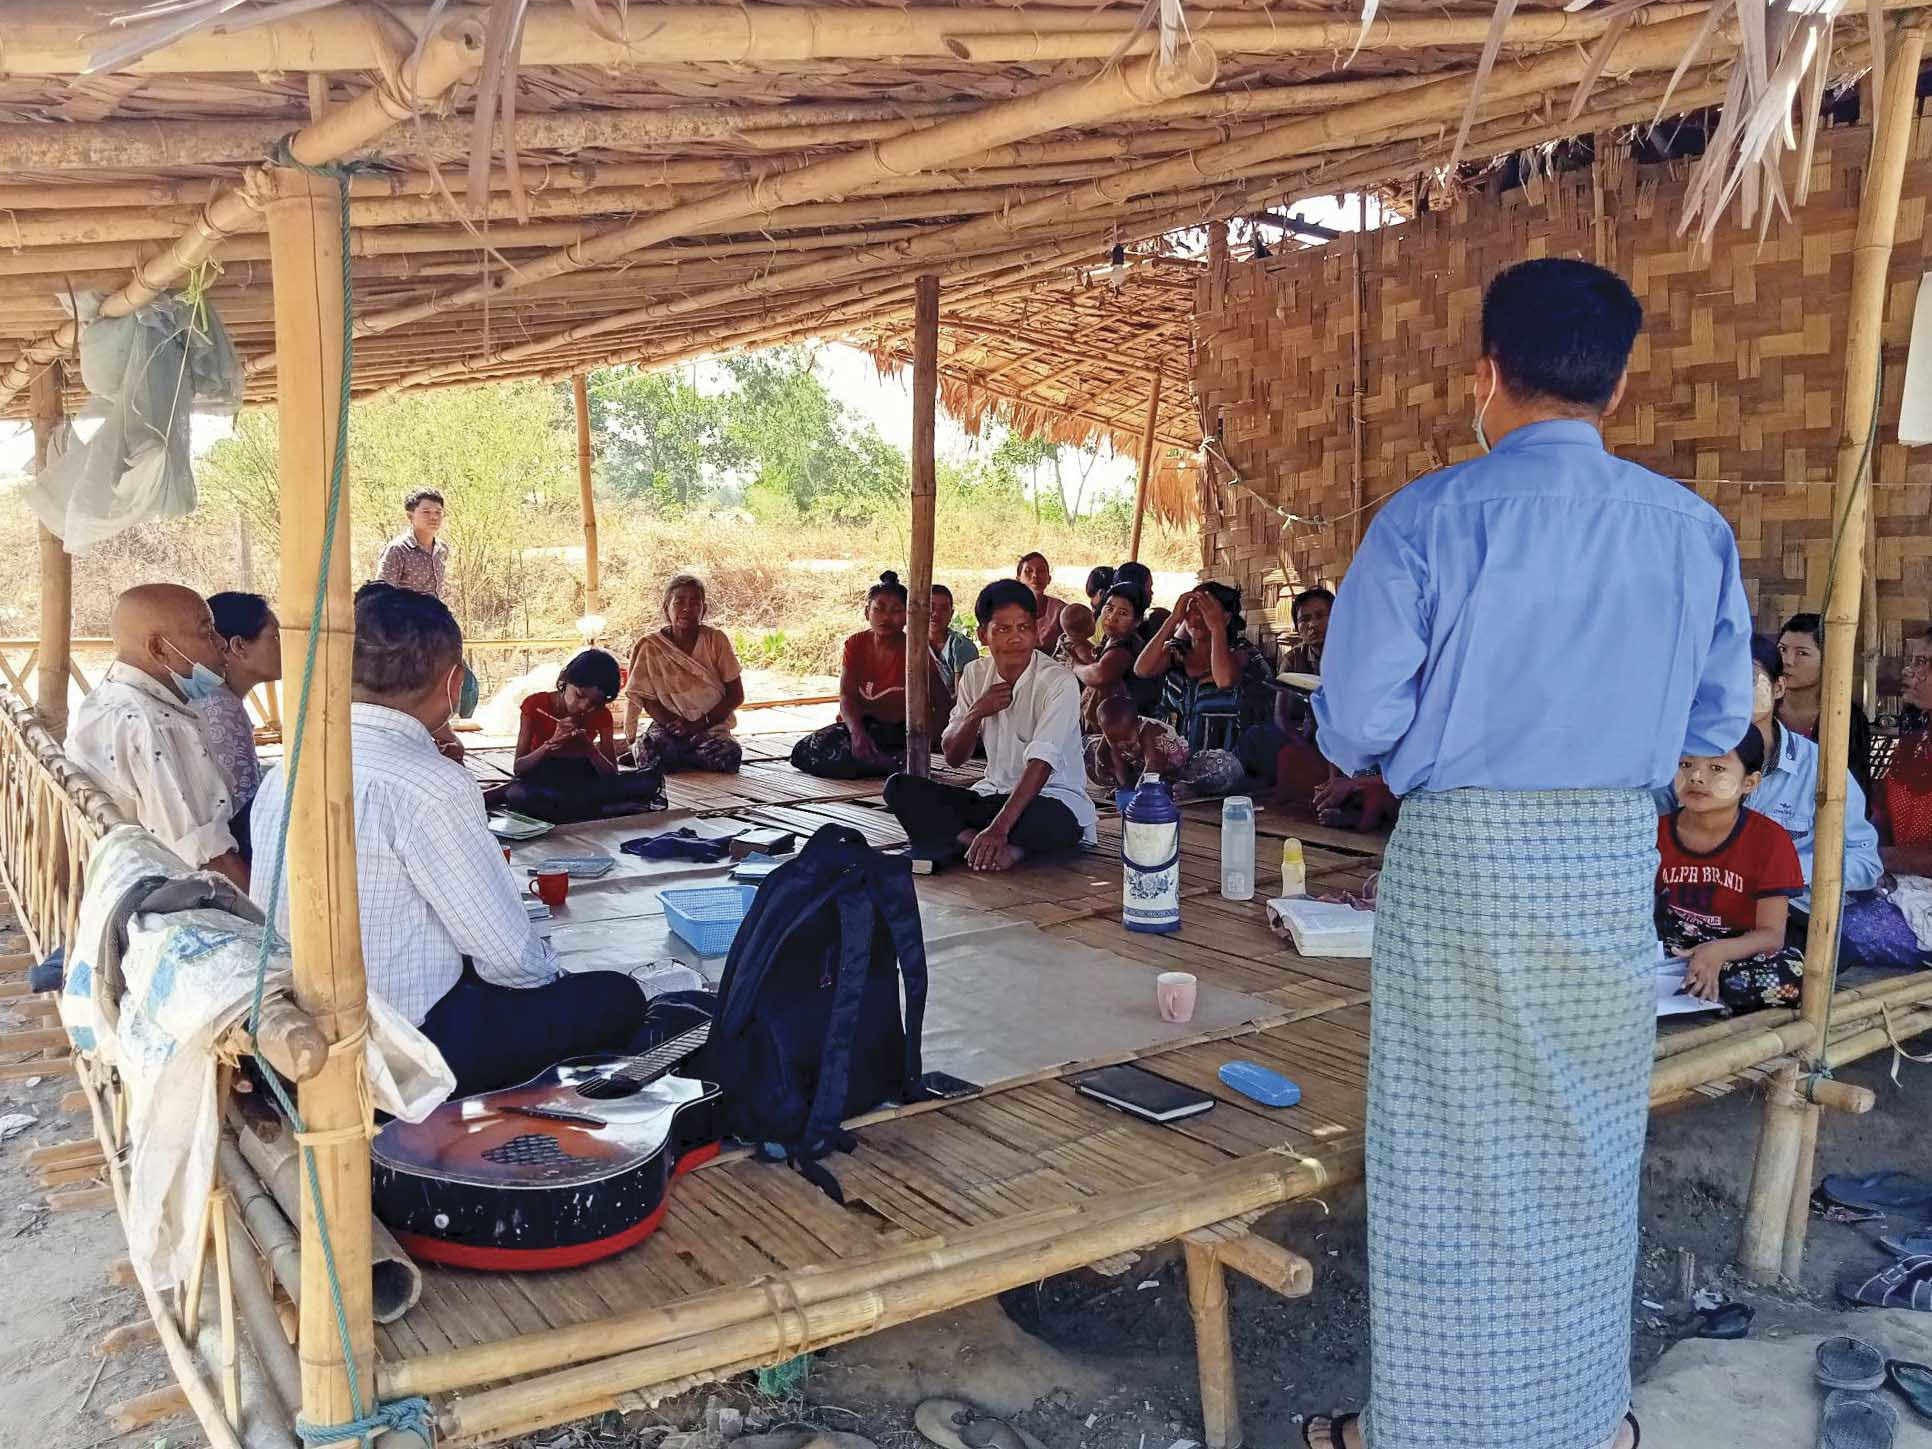 Christians in Burma gather for church in a pavilion made from bamboo